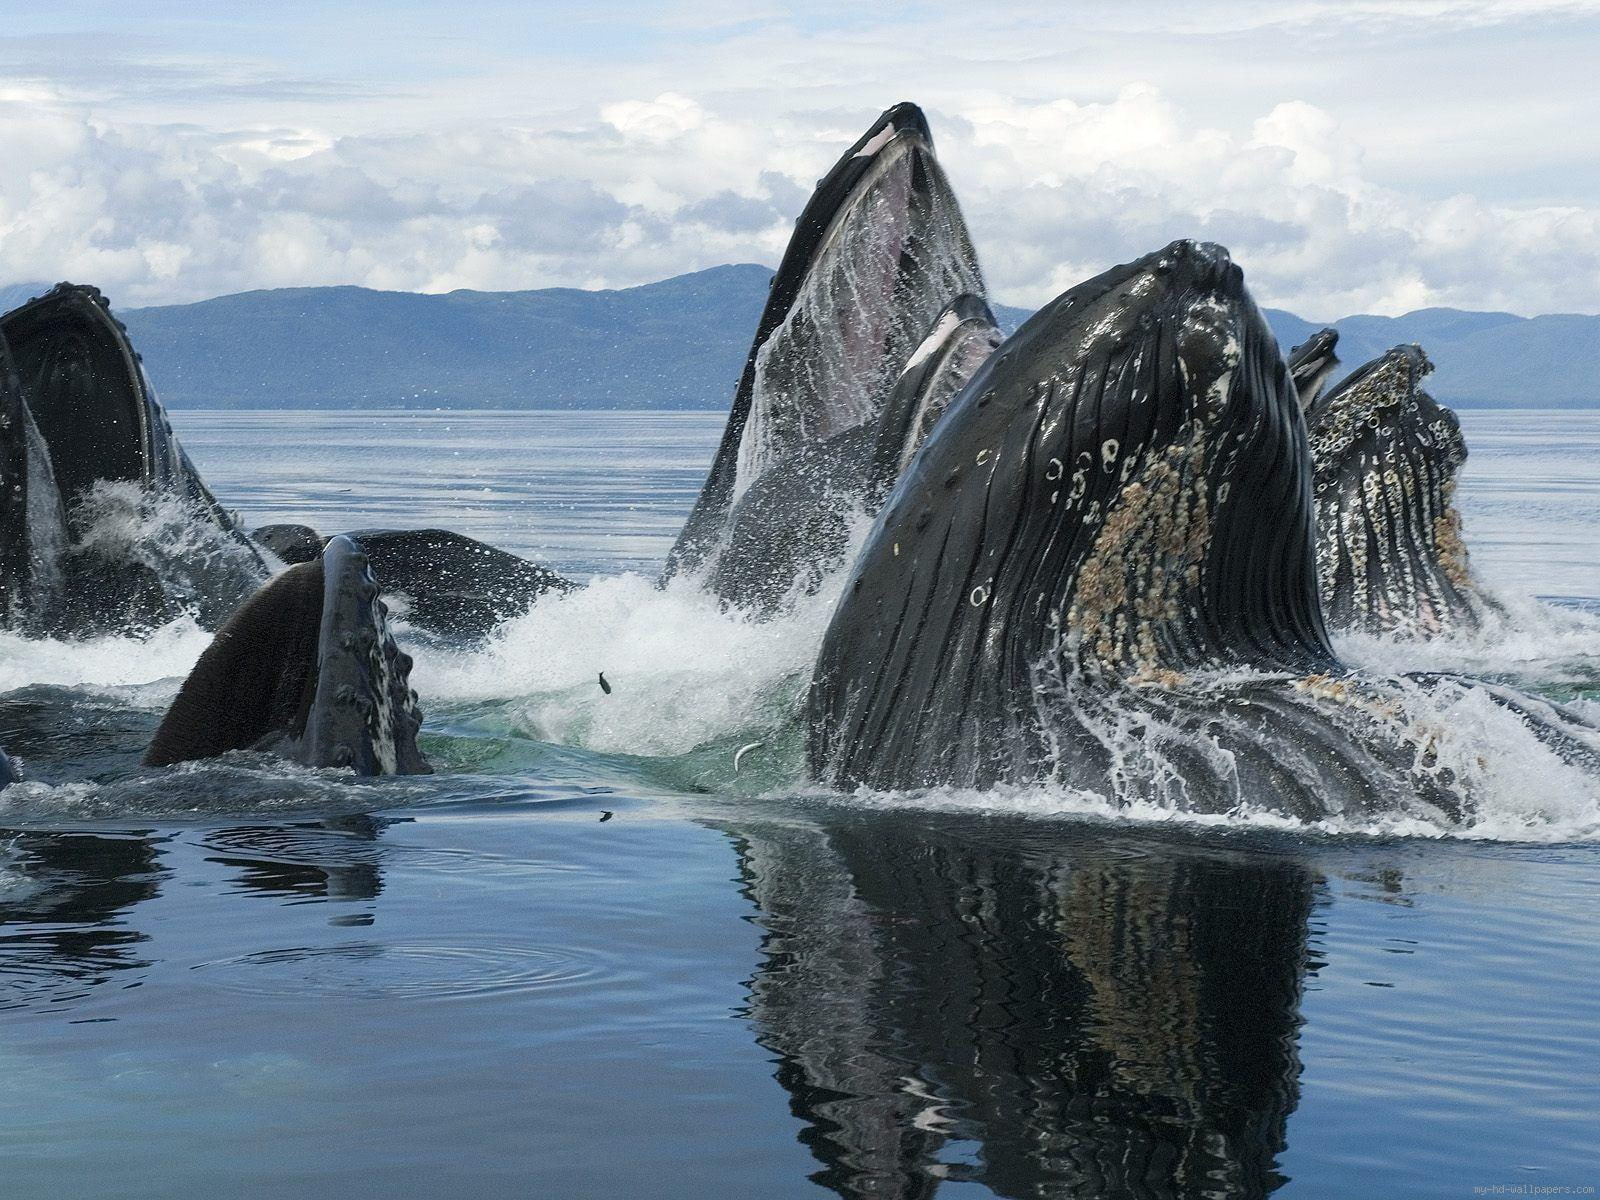 Dancing whales, group of sperm whales, animal, water, sea